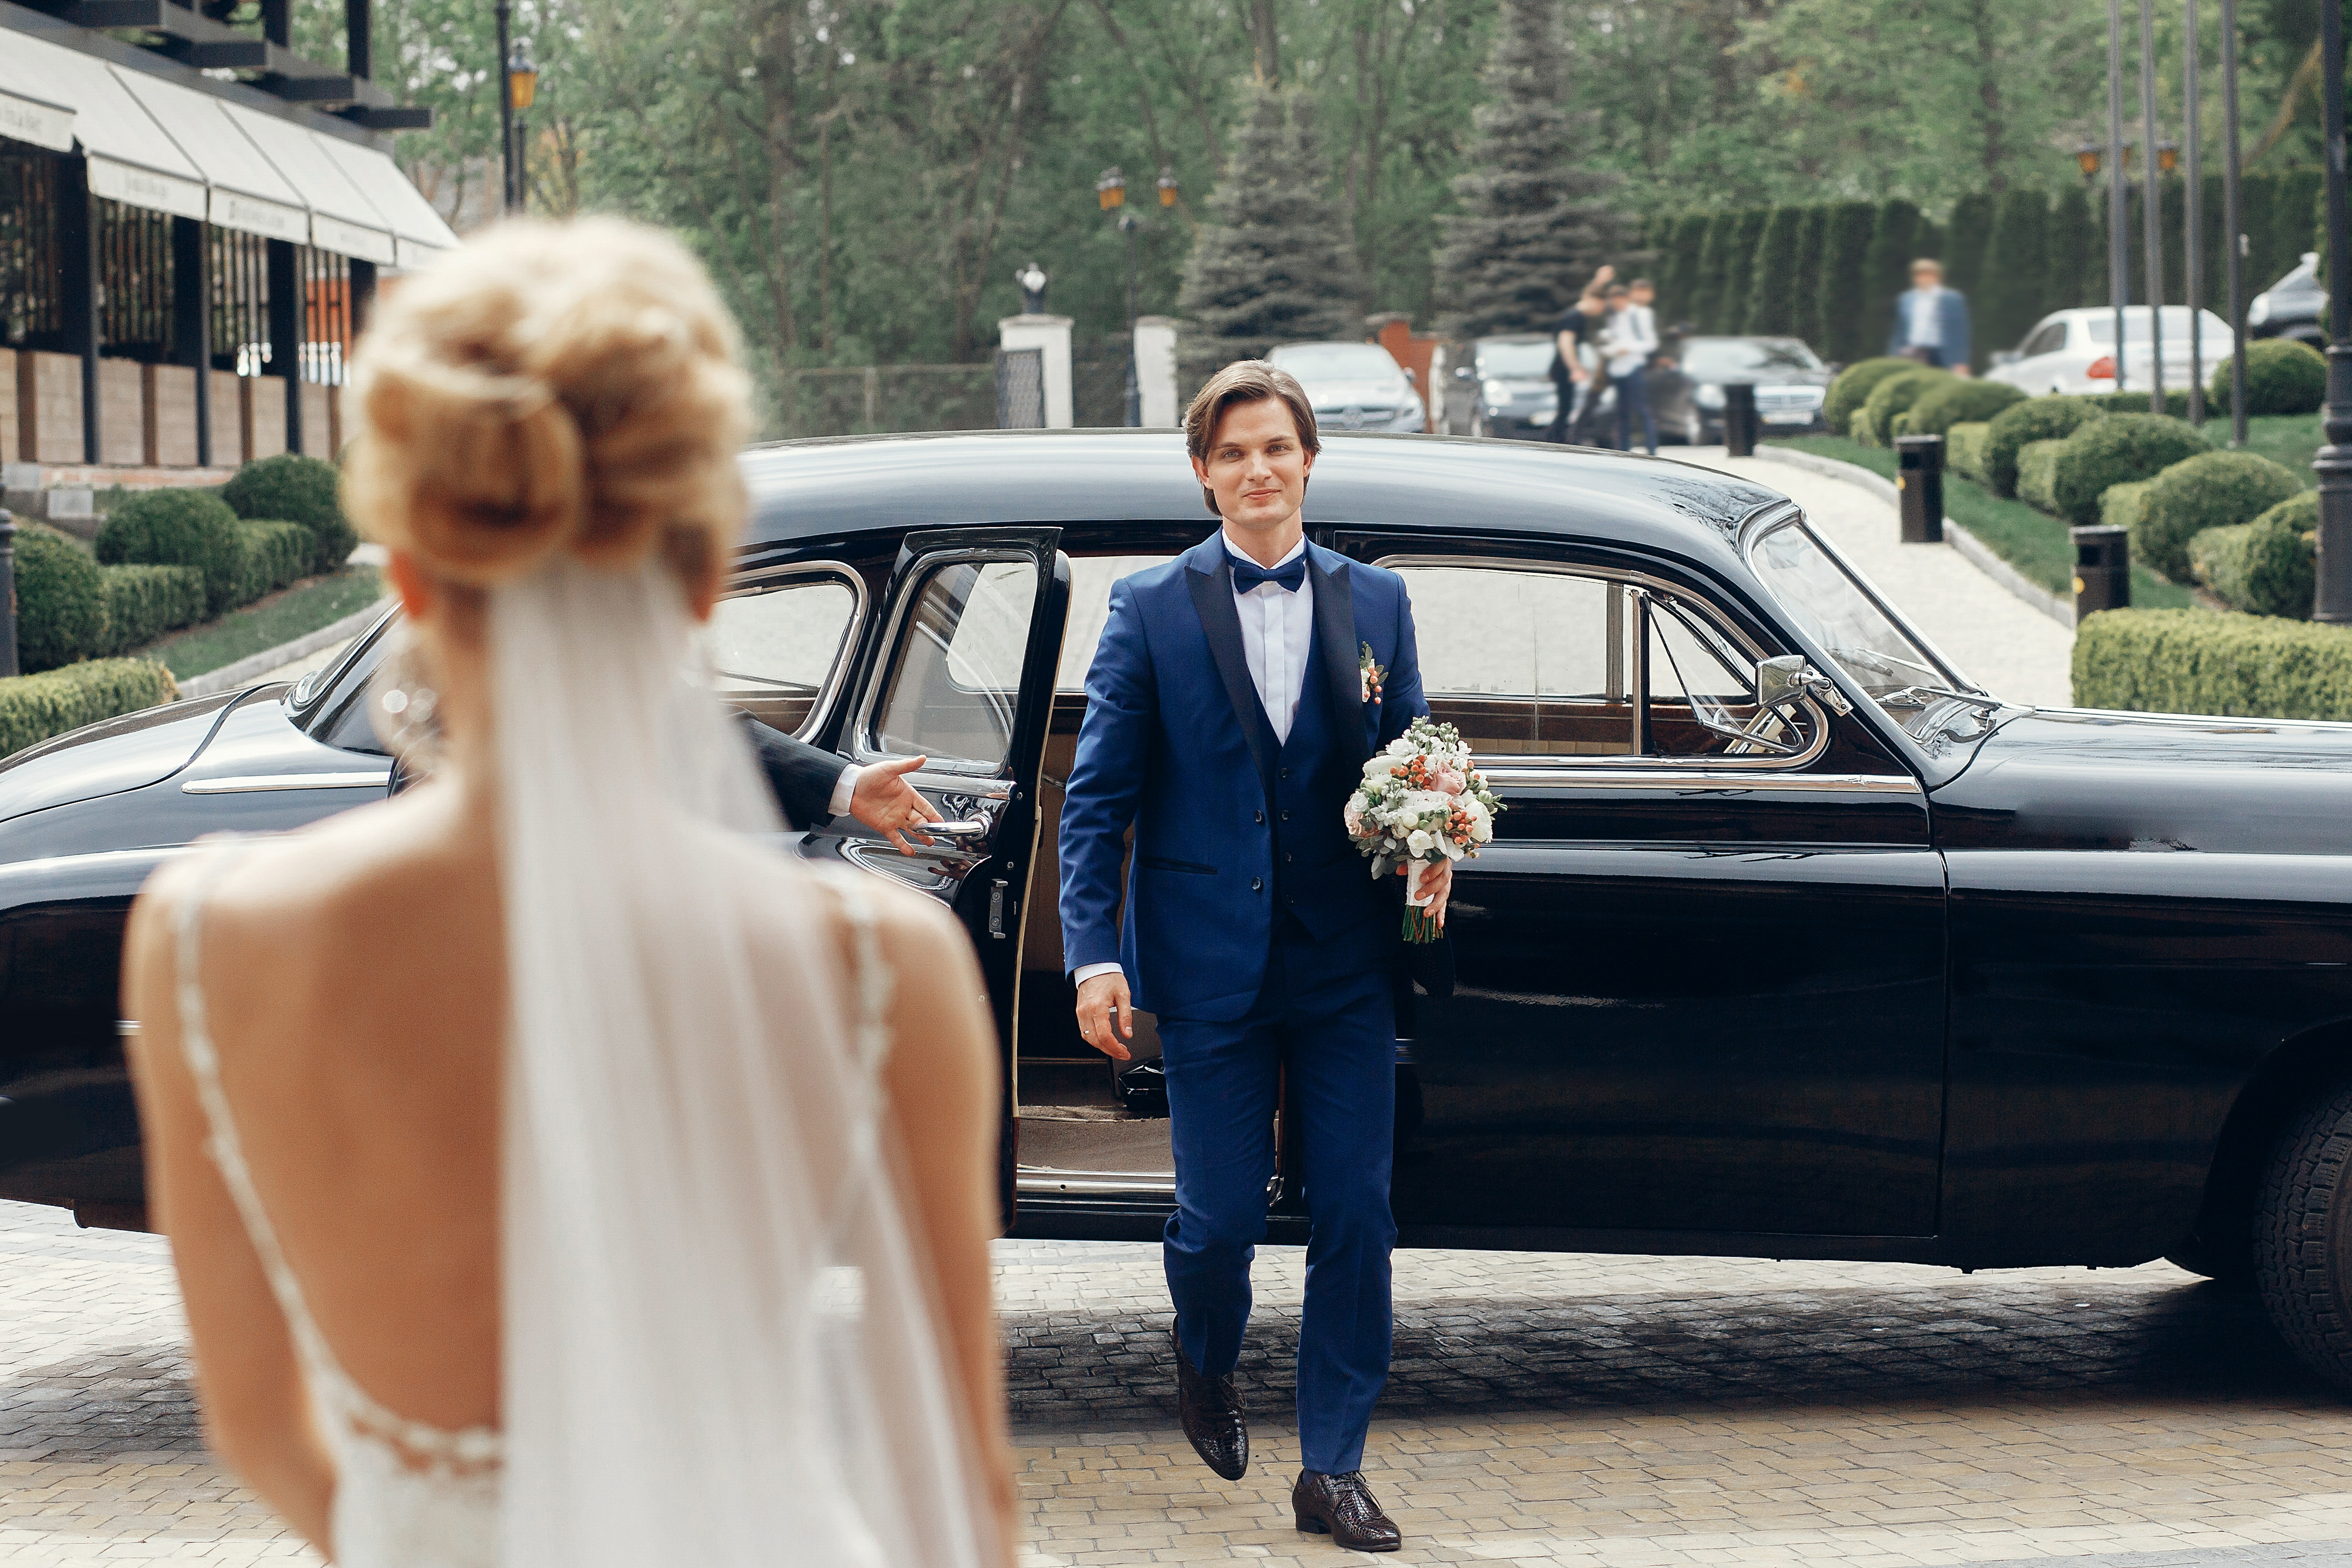 Handsome happy groom with wedding bouquet walking out of black r